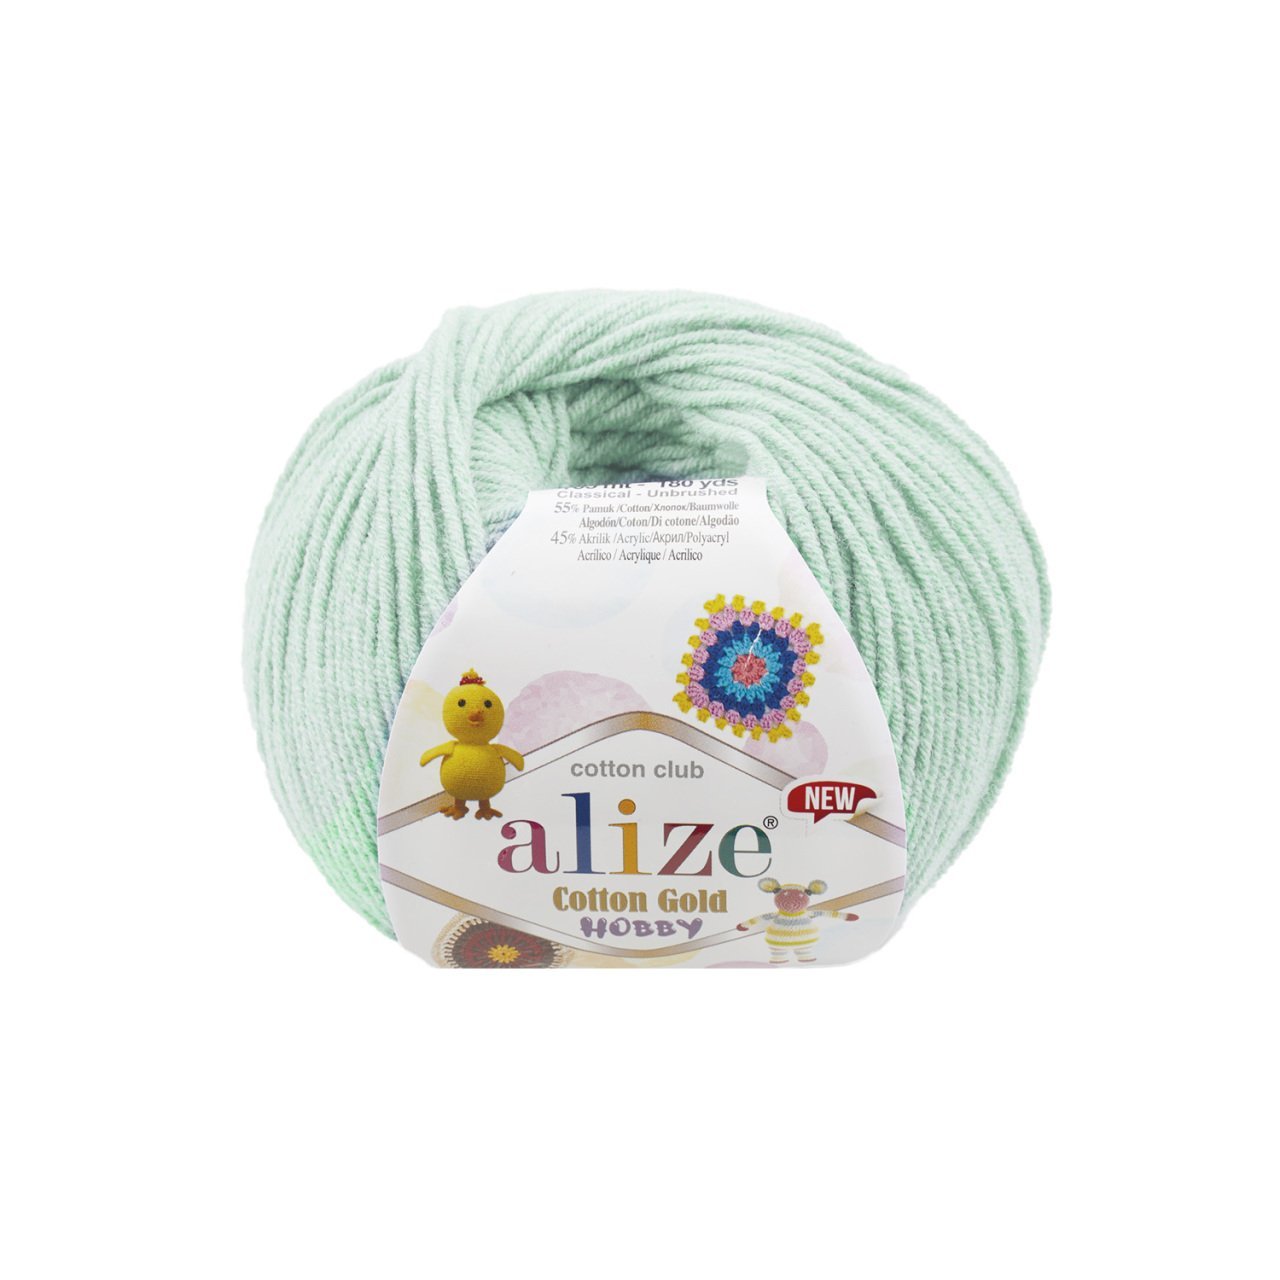 Alize Cotton Gold Hobby 522 Mint